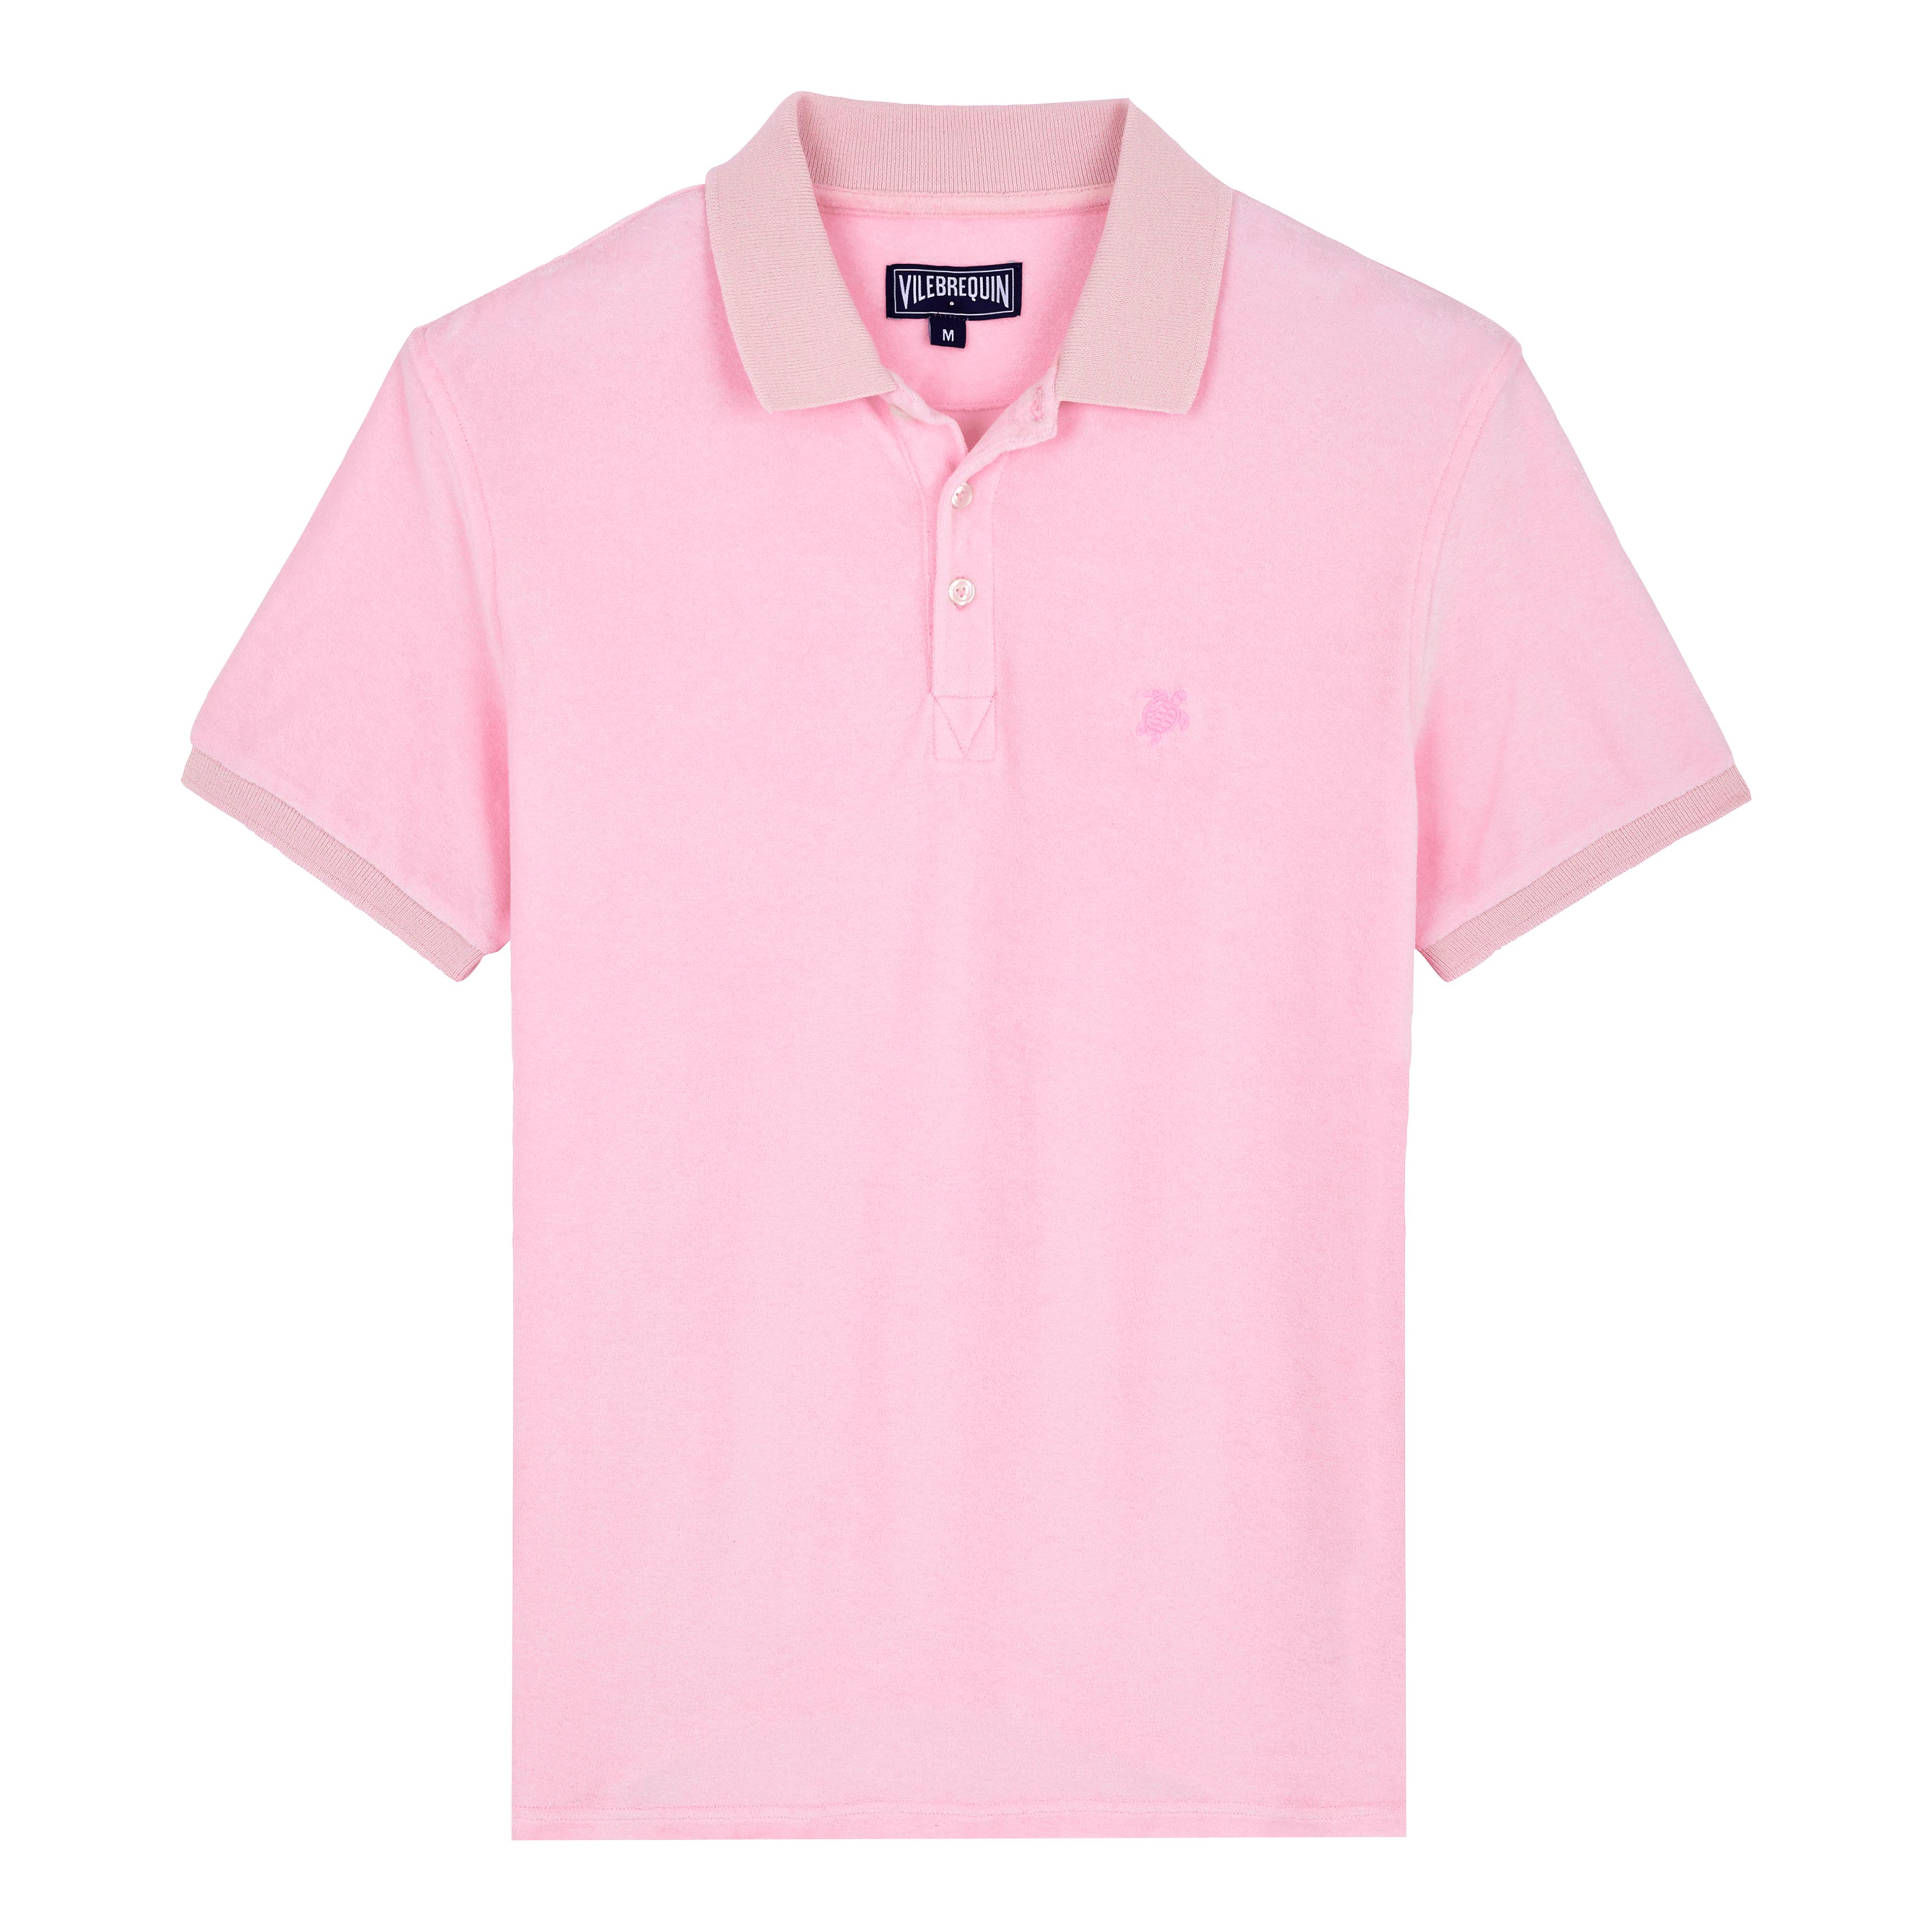 Vilebrequin Cotton Men Terry Cloth Polo Shirt Solid in Pink for Men - Lyst